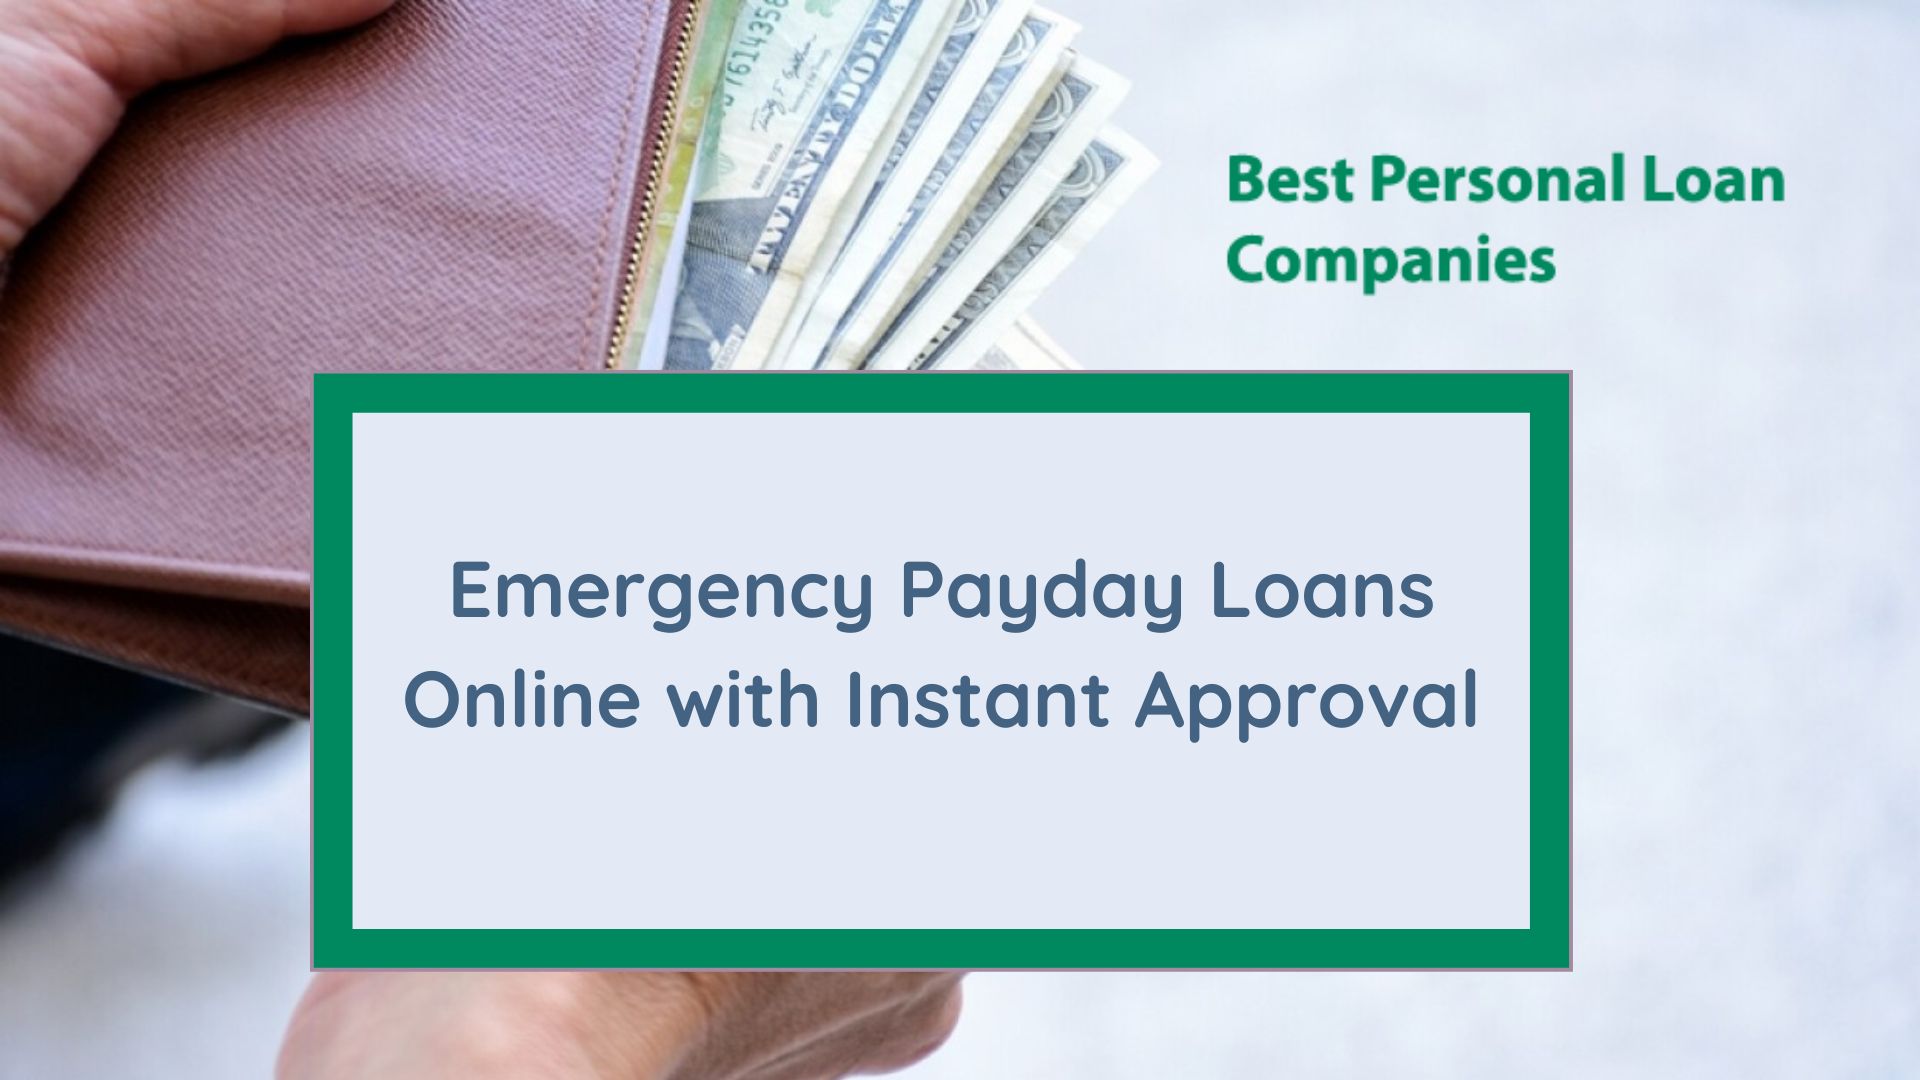 Emergency Payday Loans Online with Instant Approval